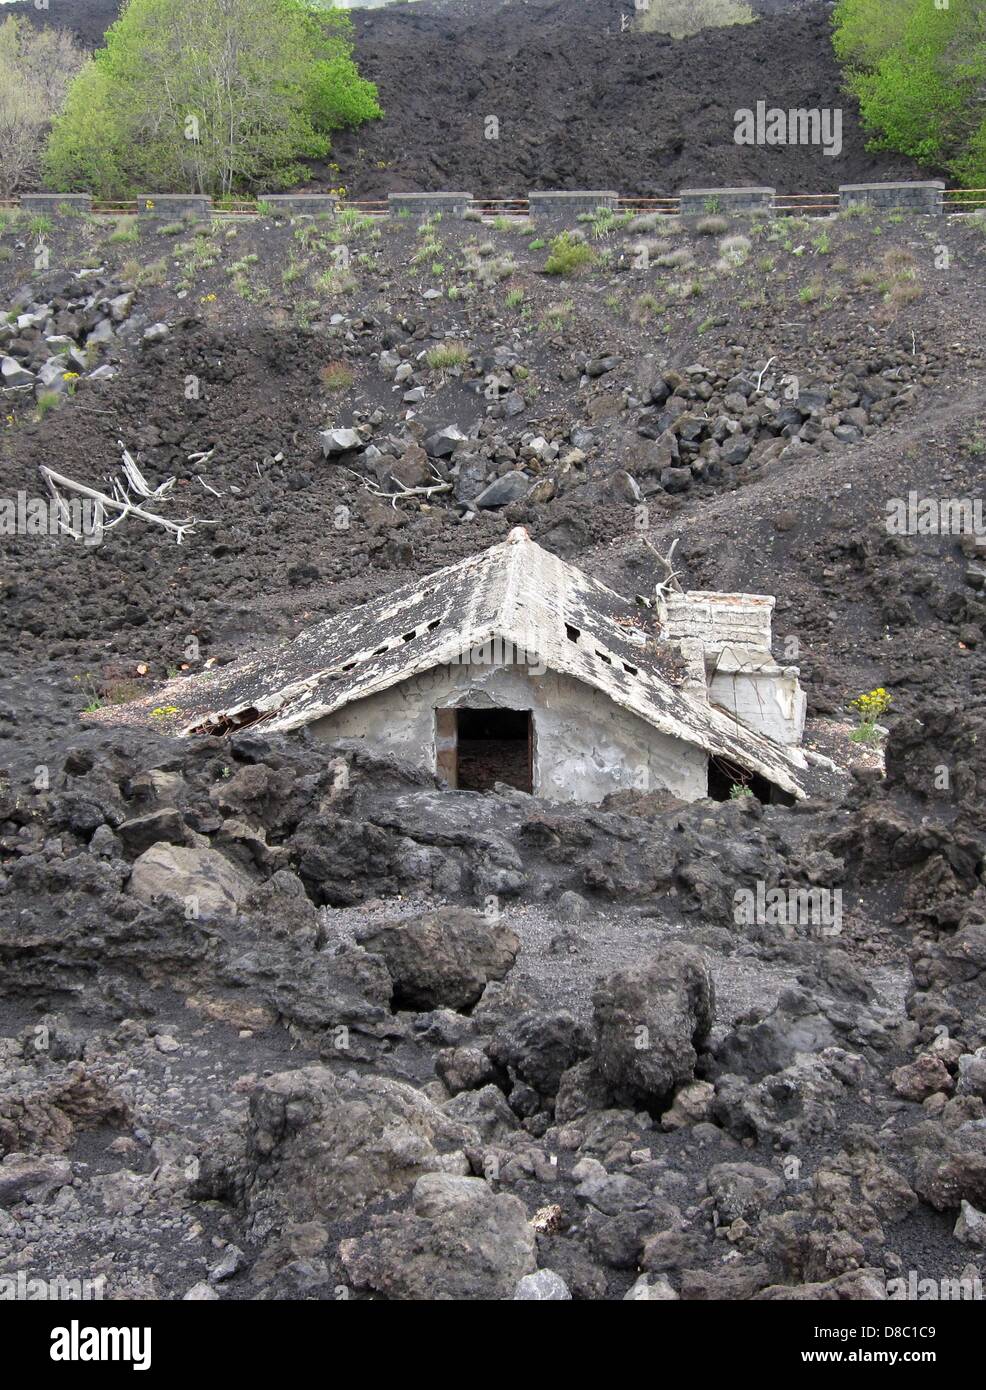 A house is covered with cooled lava from Mount Etna near Zafferana Etnea, Sicily, Italy, 07 May 2013. With a height of 3,323 meters, Mount Etna is Europe's tallest and most active volcano. Photo: JENS KALAENE Stock Photo